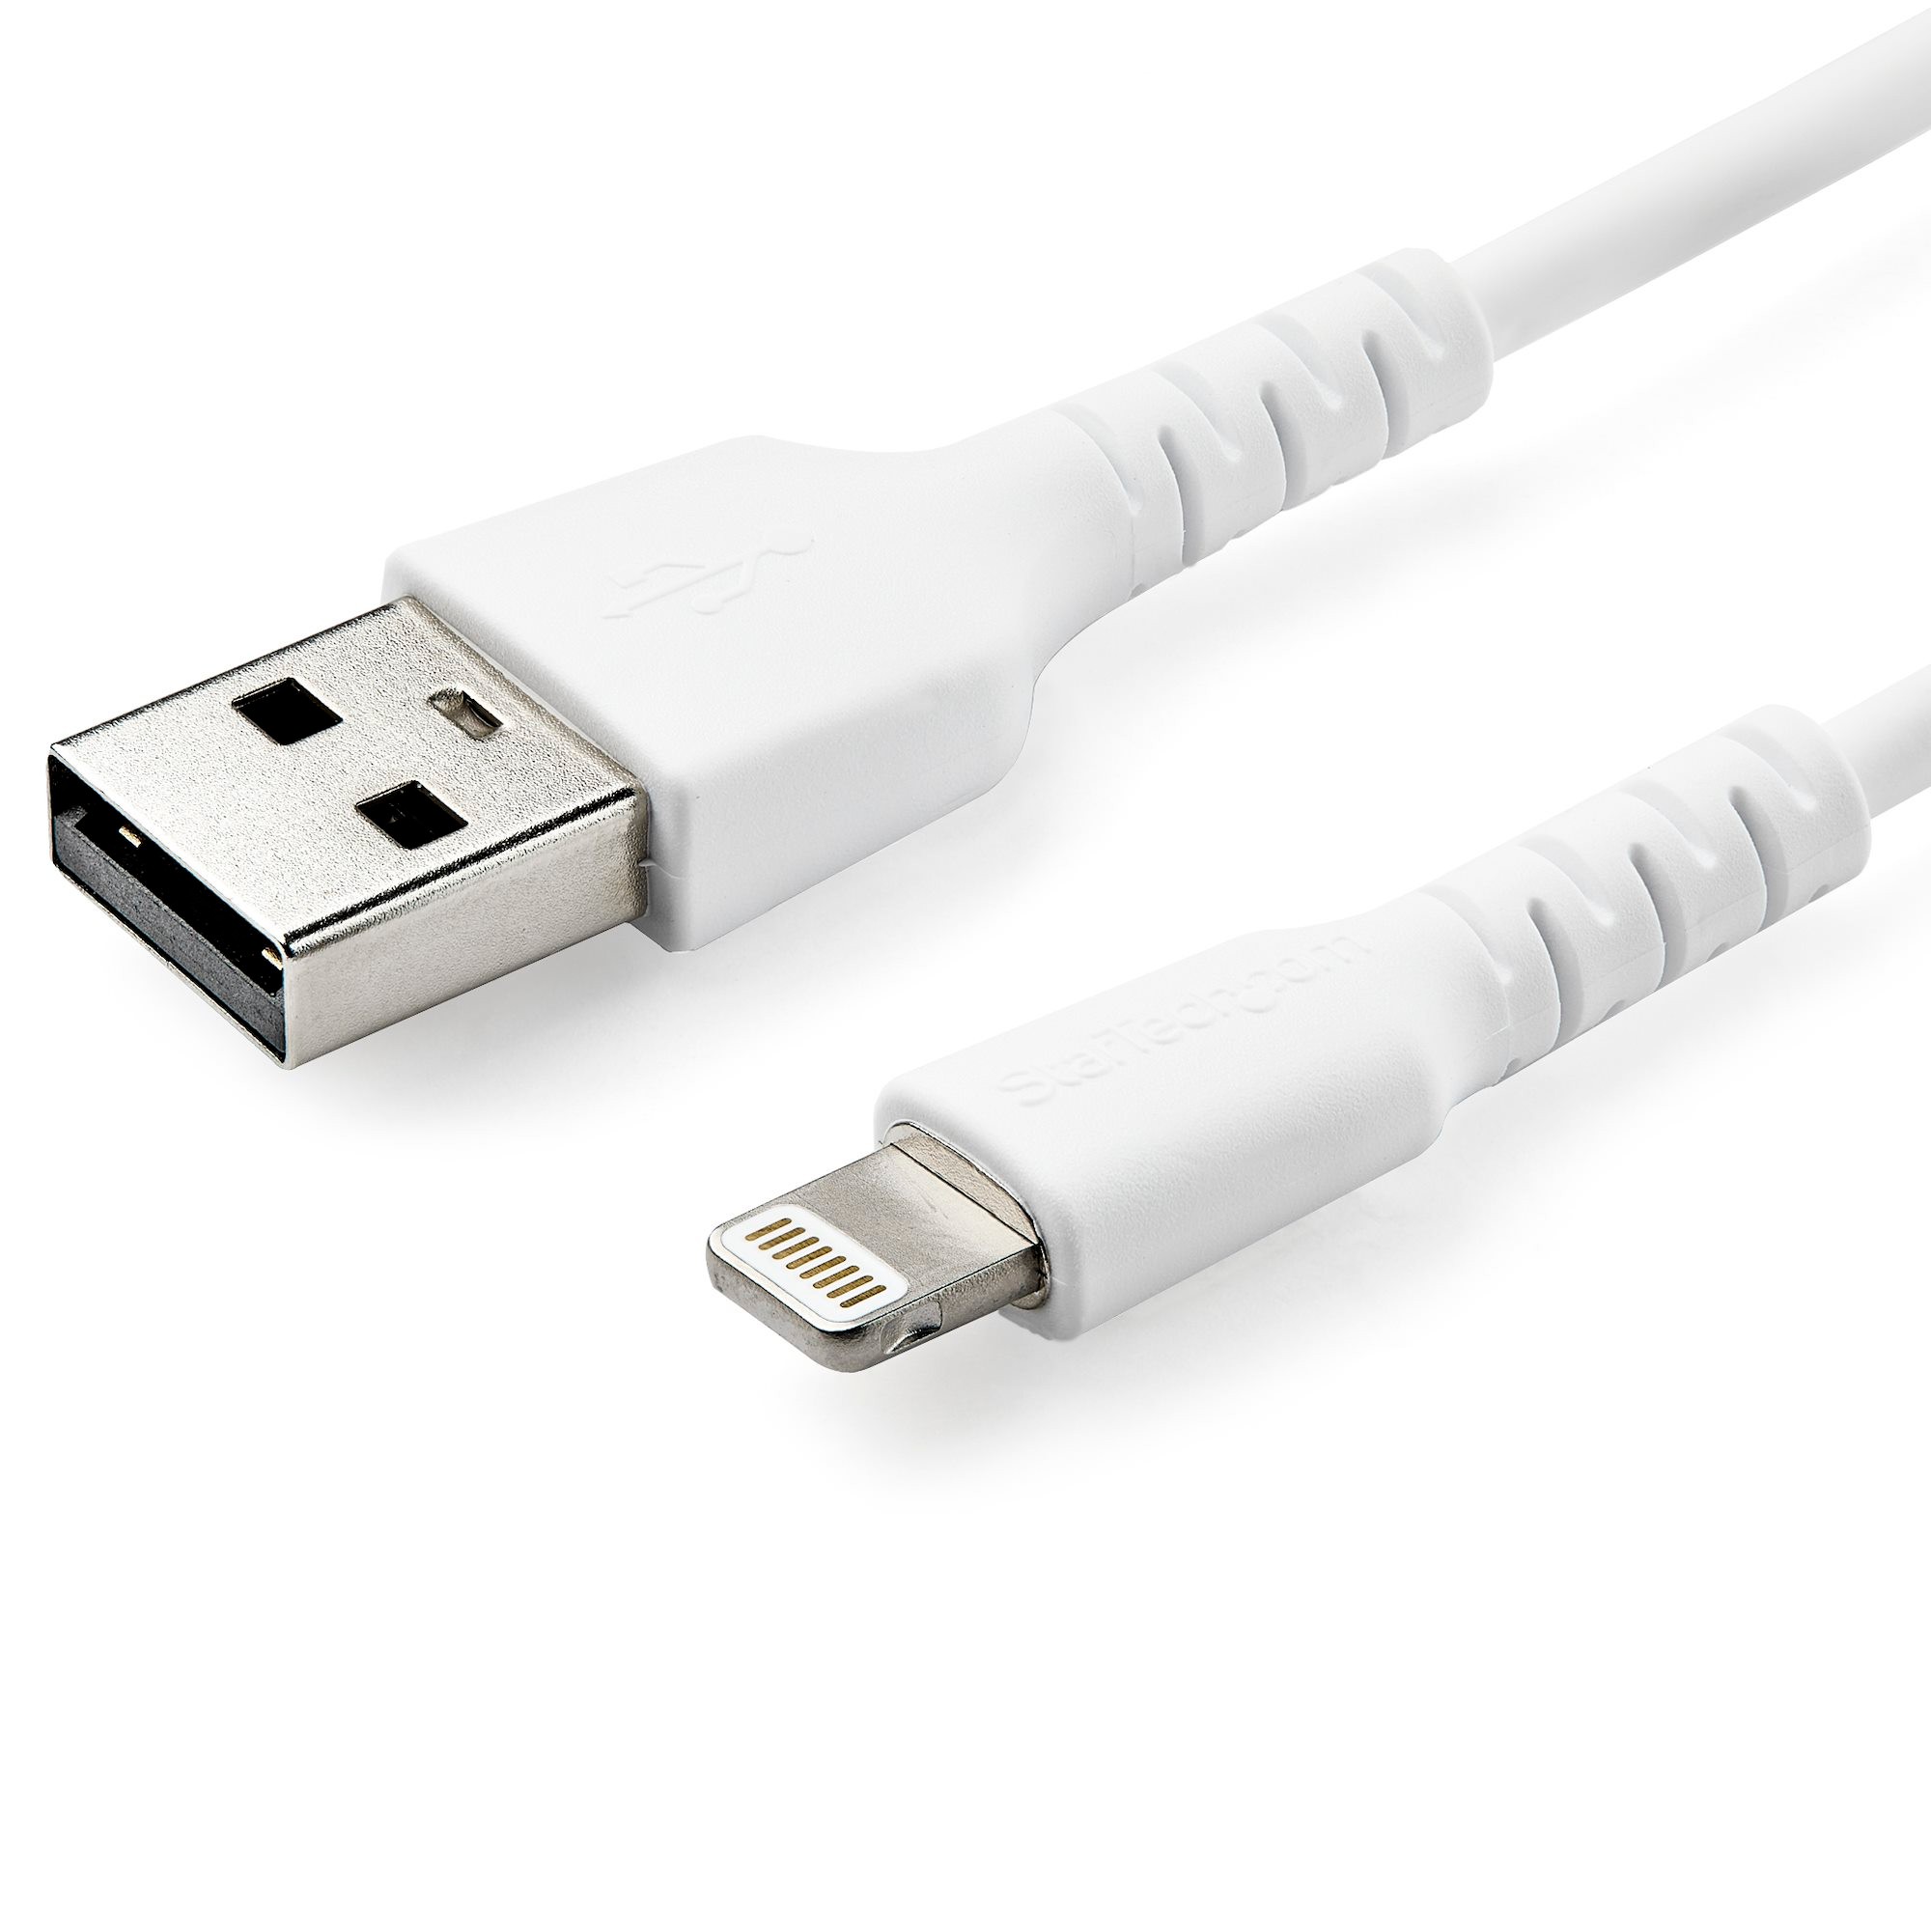 StarTech.com USB C to Micro USB Cable 3 ft 1m USB 3.1 10Gbps Micro USB Cord  USB Type C to Micro USB Cable 3.28 ft USB Data Transfer Cable for Tablet  Portable